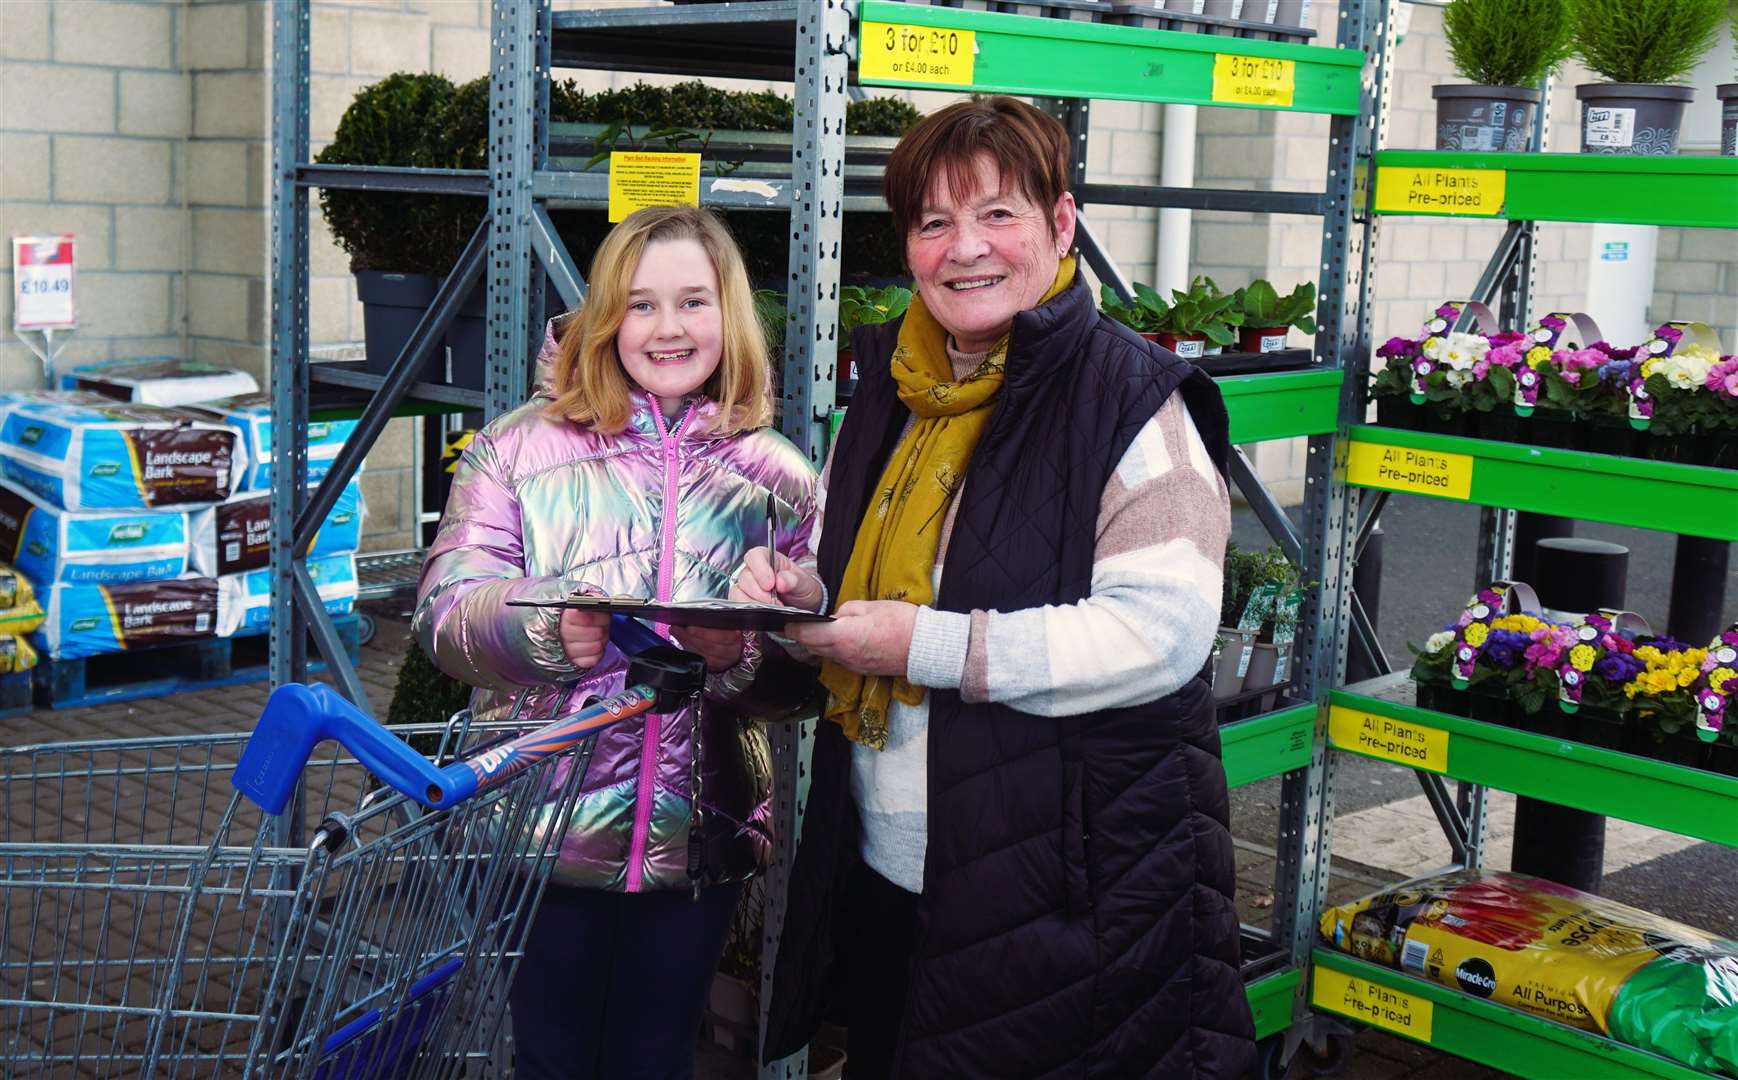 Martha with Doreen Turner from the Wick community council. Doreen praised the young entrepreneur for the petition and was happy to sign it. Picture: DGS